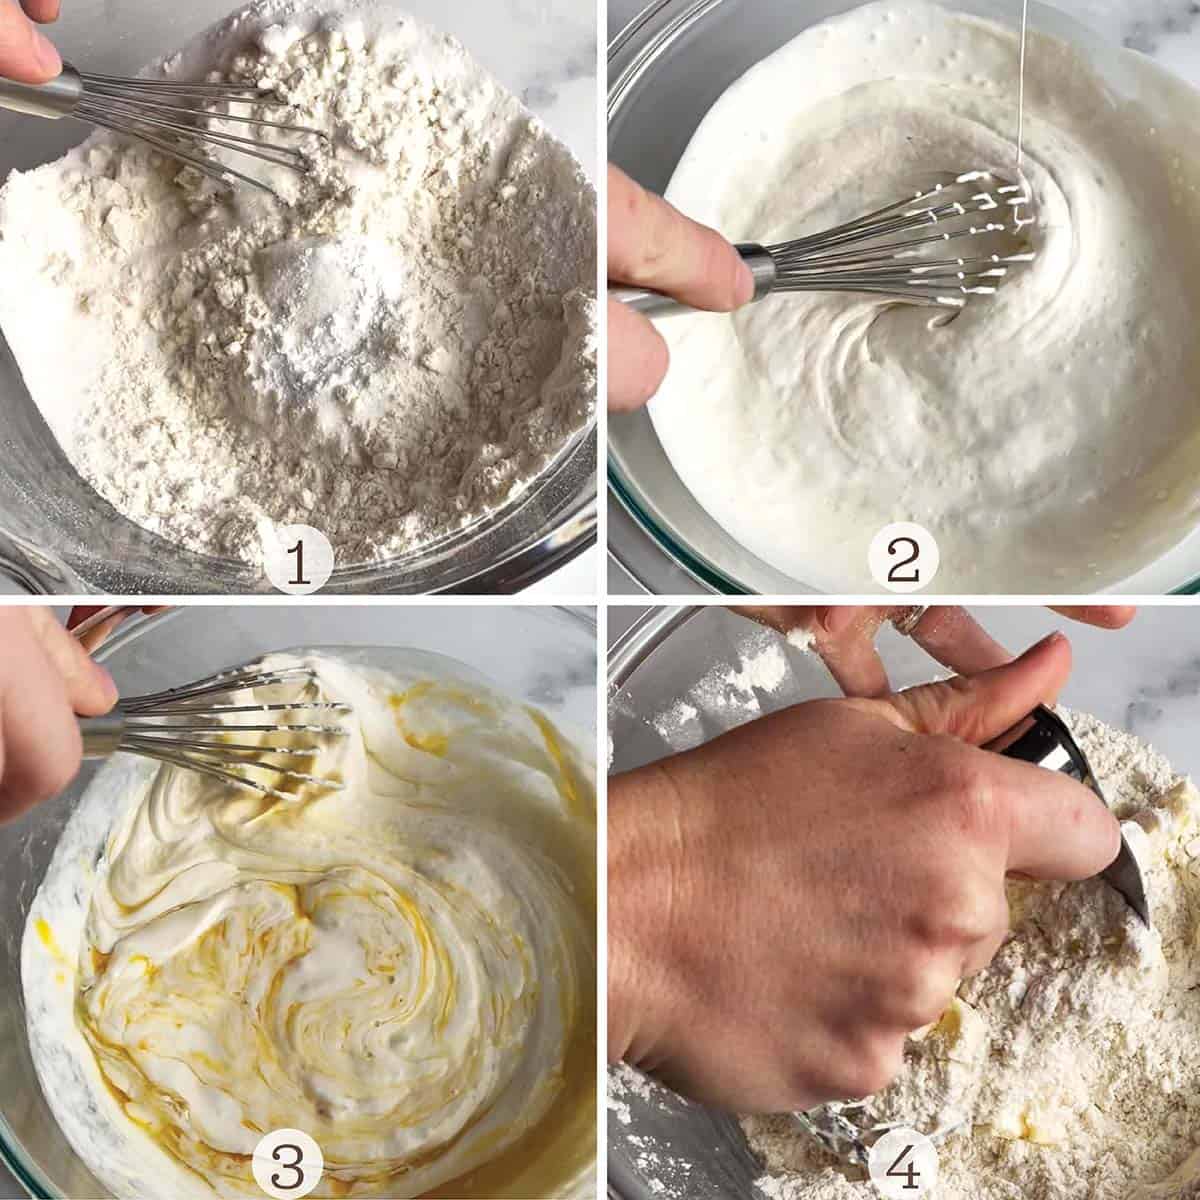 Four images of making scones. Mixing the flour, whisking the wet ingredients and cutting the butter in.